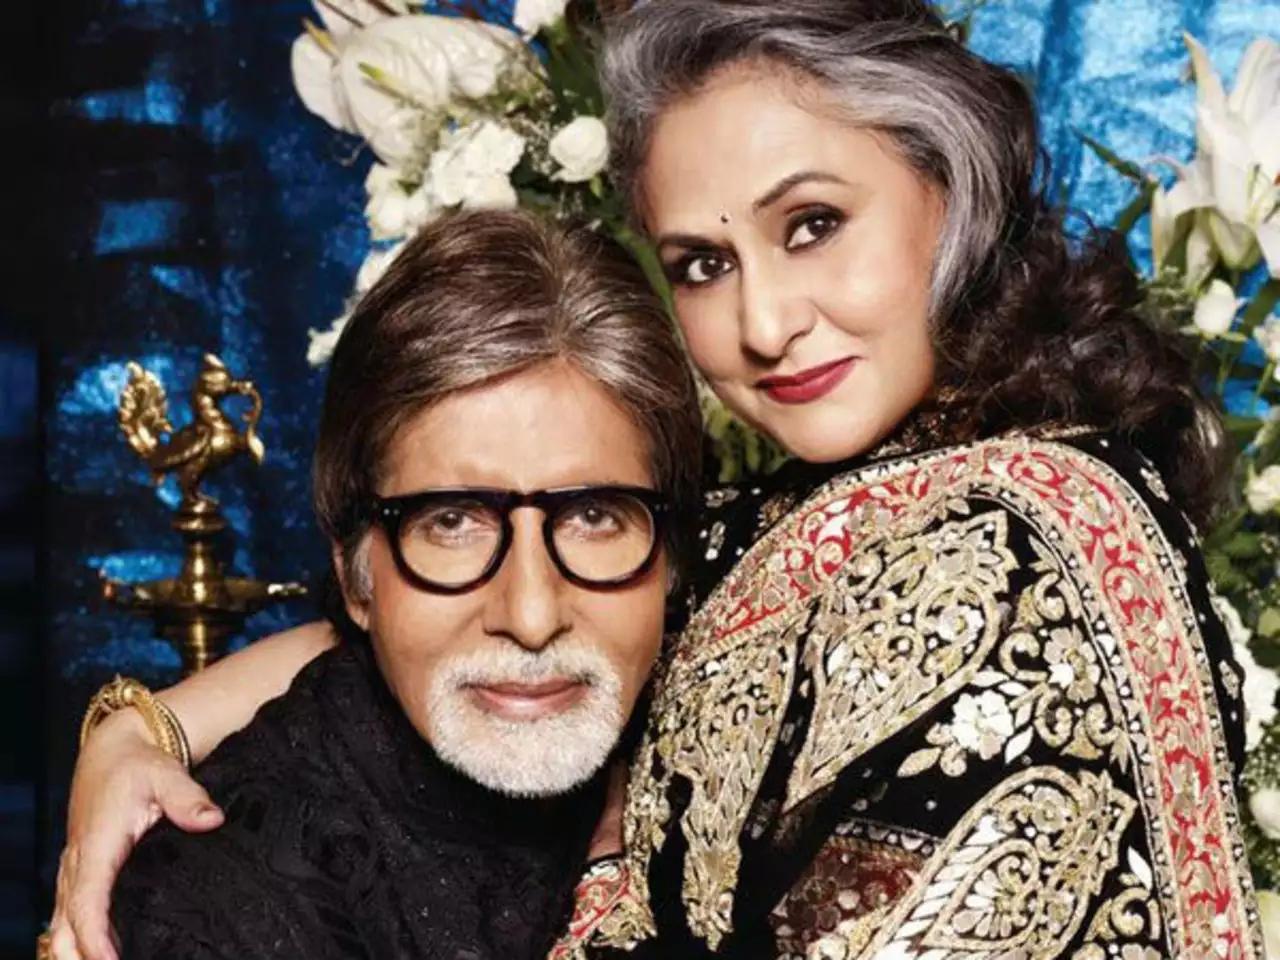 In 1973, Amitabh married the talented actress Jaya Bhaduri. Their on-screen chemistry sizzled in movies like 